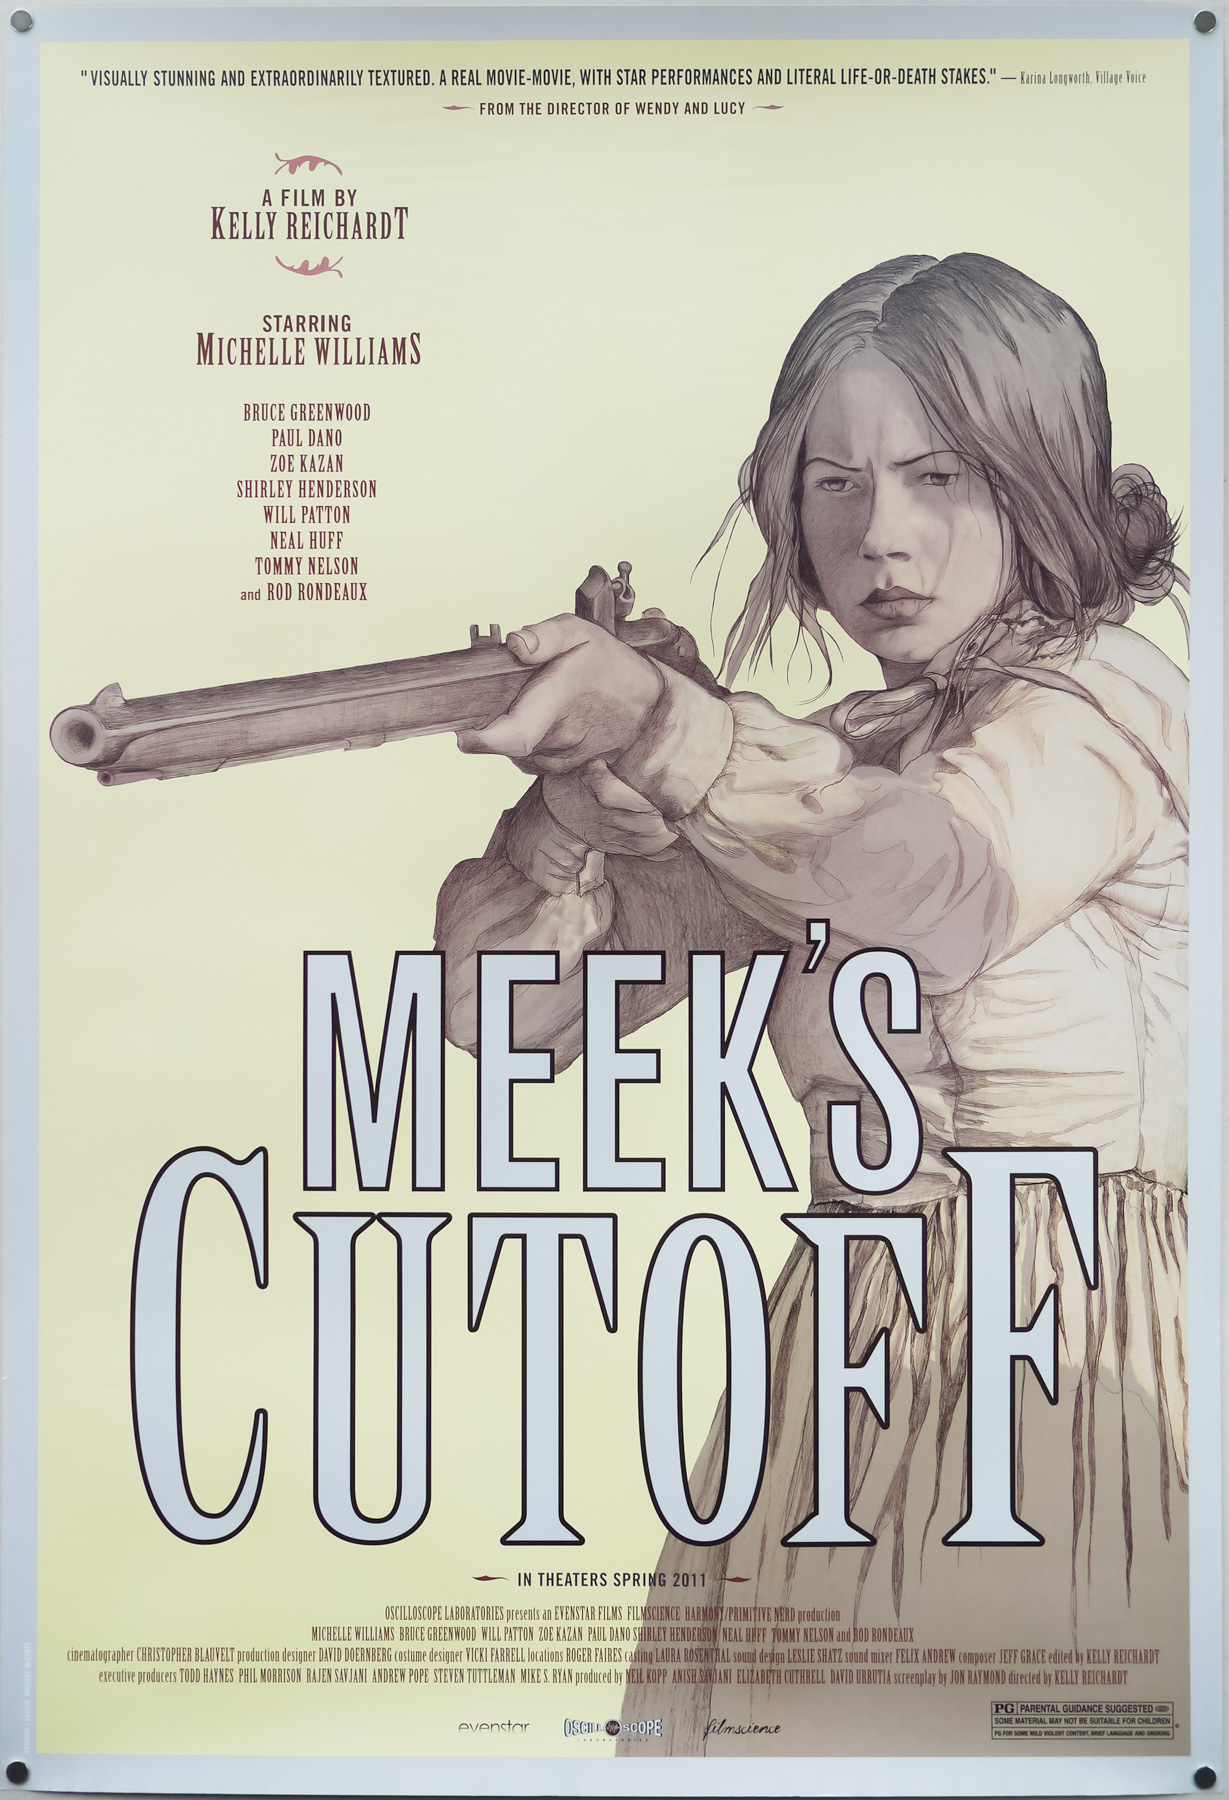 Movie poster for Meek's Cutoff